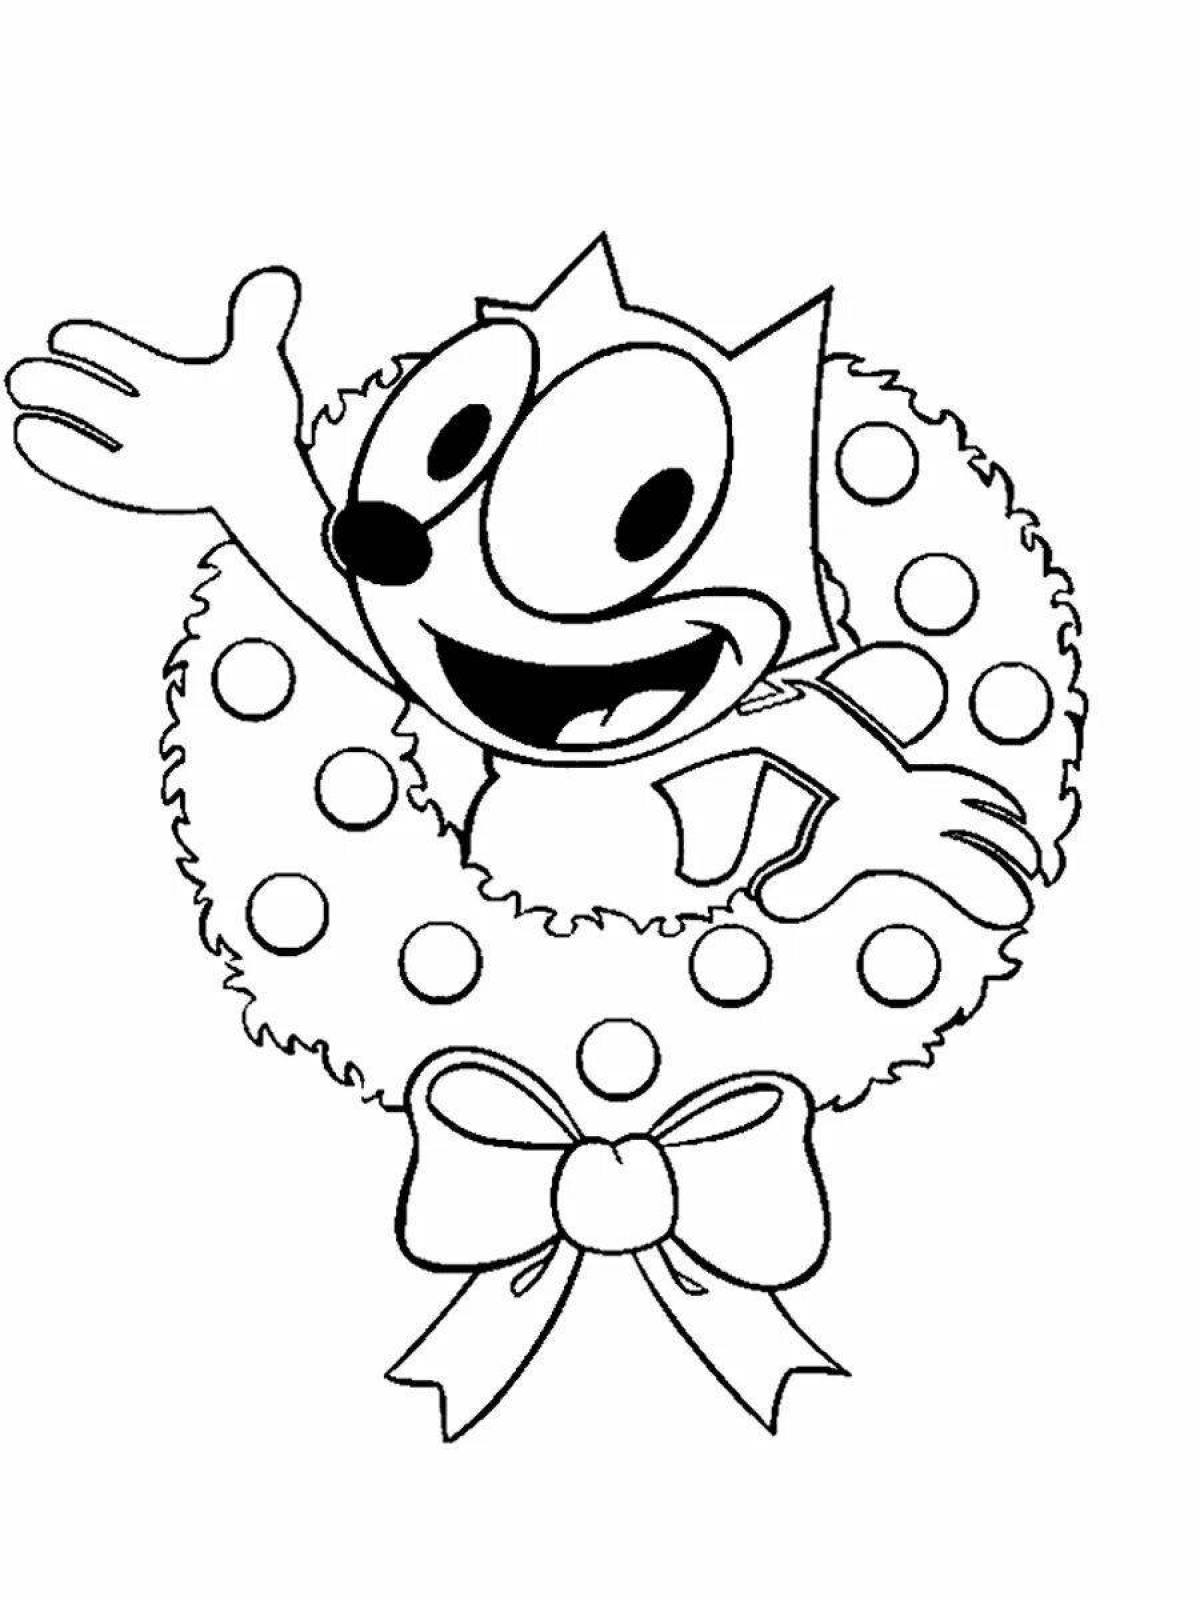 Felix the cat glowing coloring page